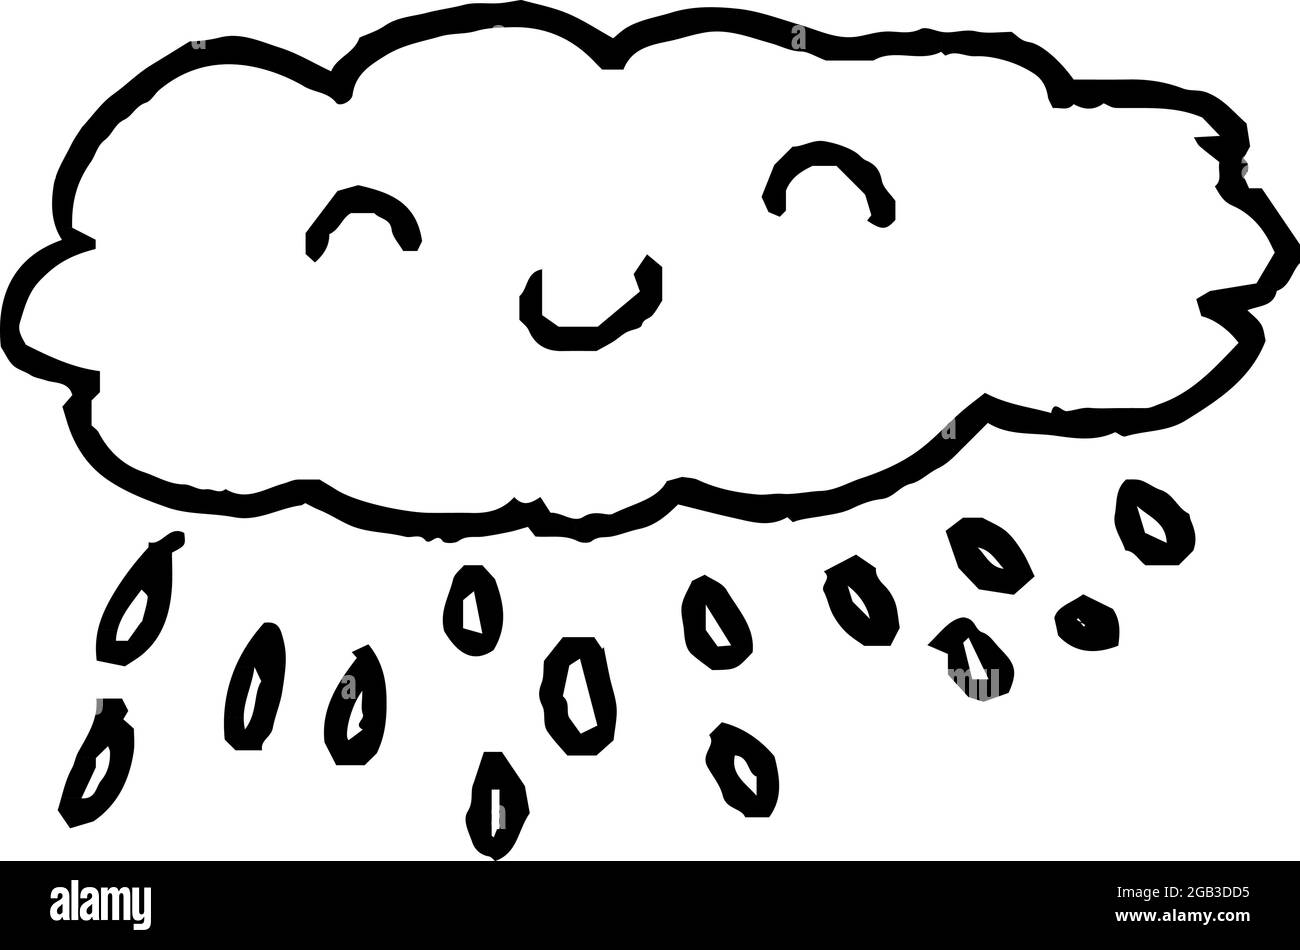 This is a illustration of Graffiti of rain clouds that children drew Stock Vector